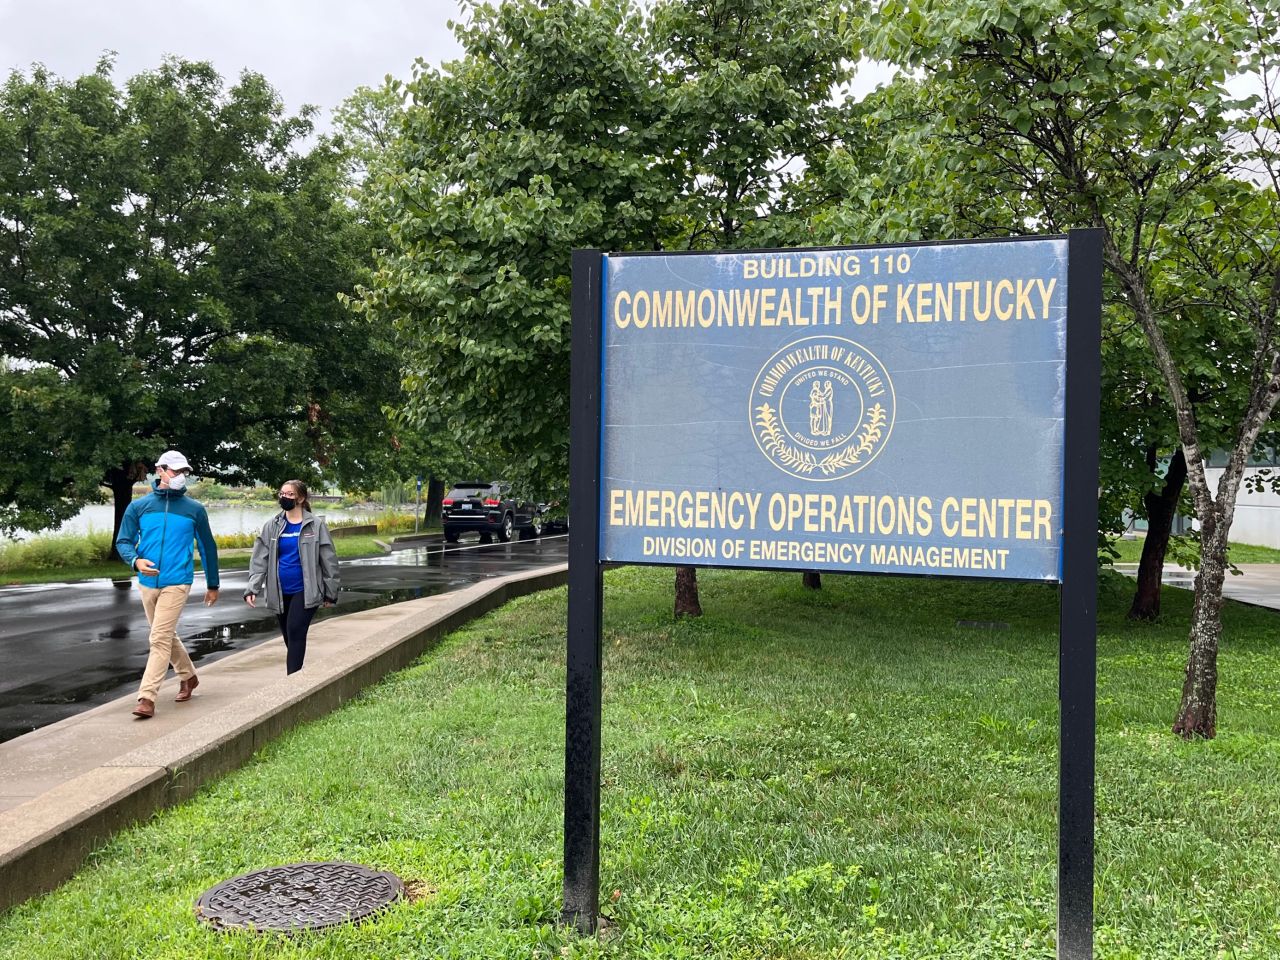 Two members of Americares Emergency Team walking by sign for Kentucky Emergency Operations Center.